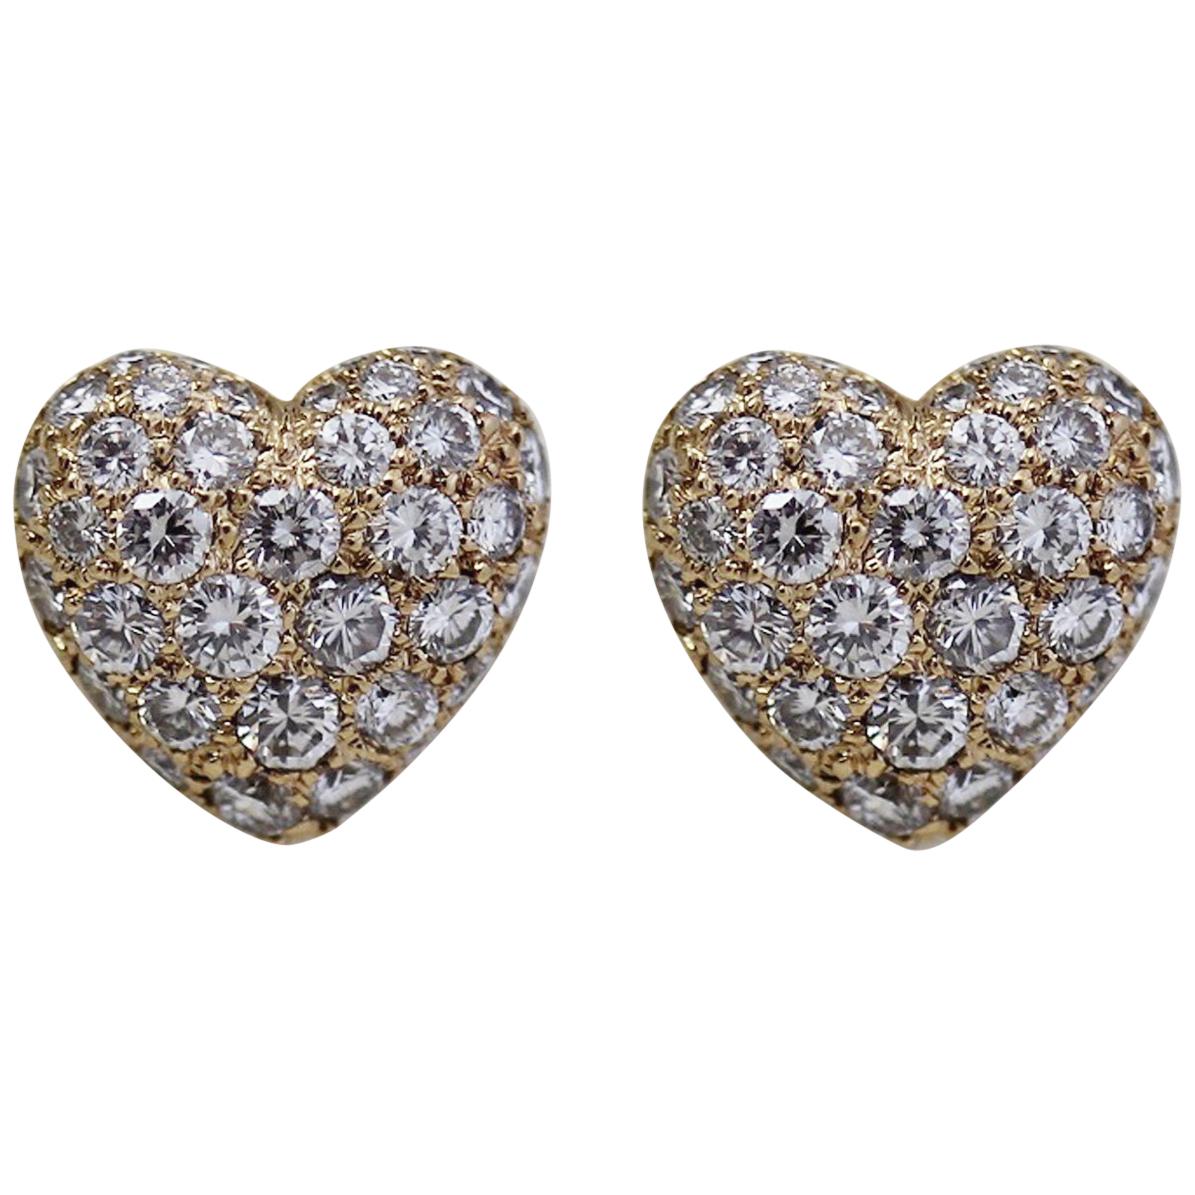 Cartier 18 Karat Yellow Pave Diamond Heart Earrings with Box and Receipt